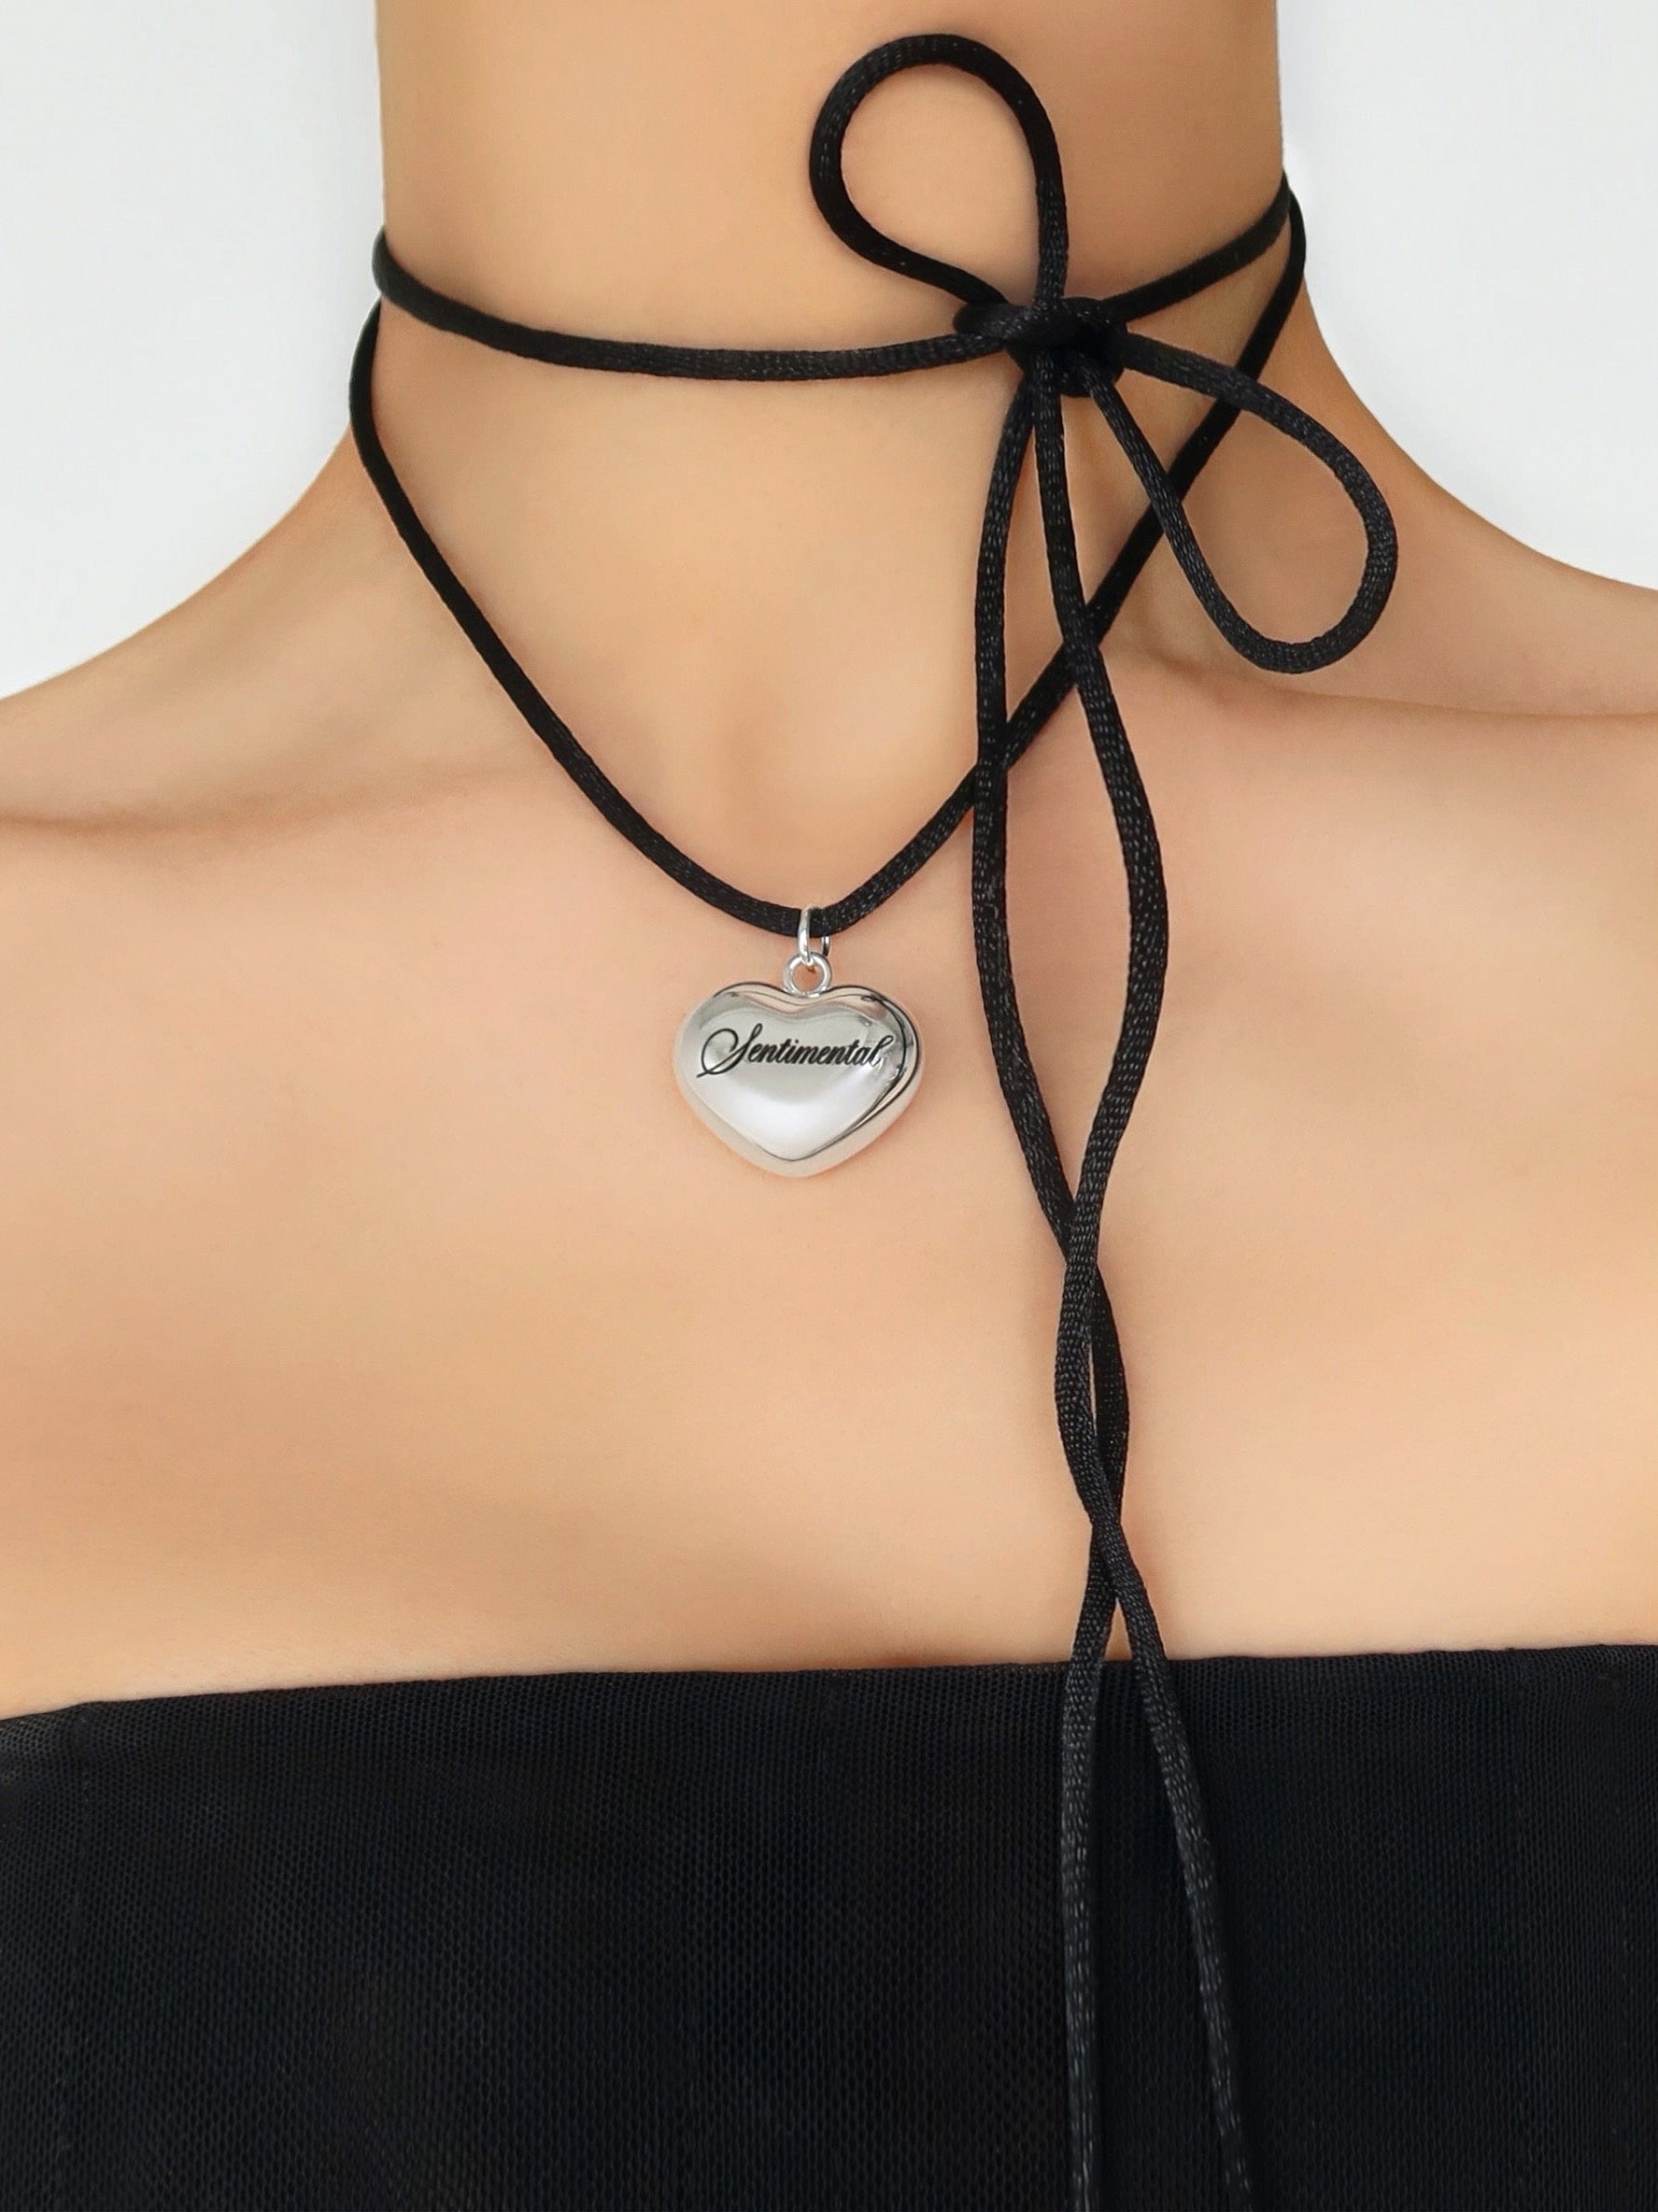 Puffed Heart String Necklace Black Cord Long Wrap Tie Choker